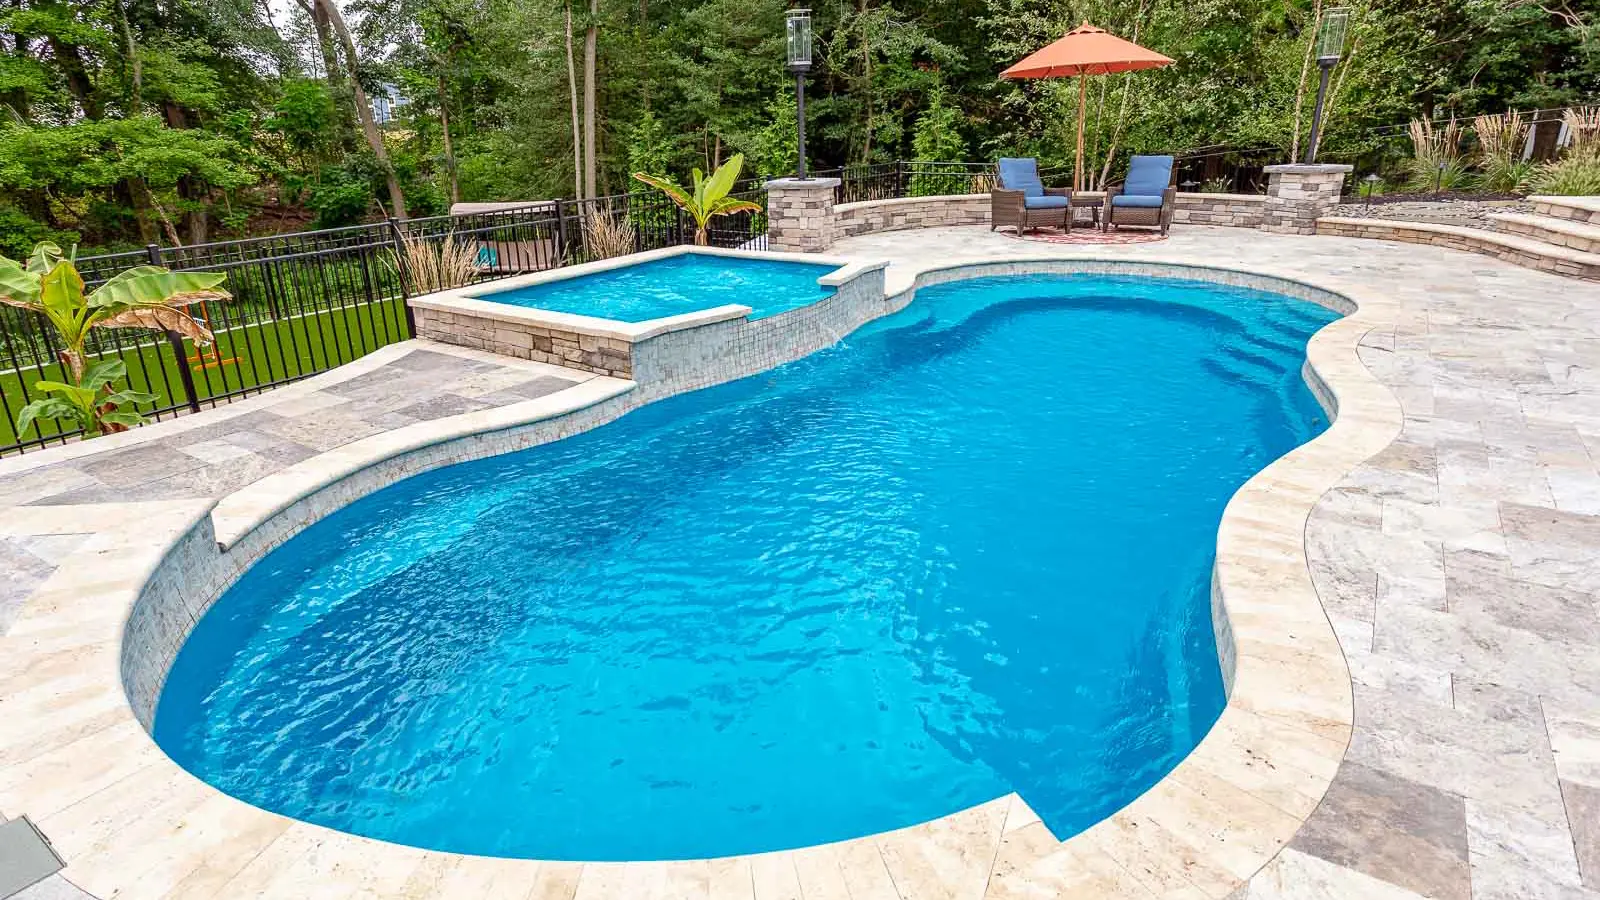 The Riviera, a freeform fiberglass pool with a wraparound entry step/ seating area and seating in the deep end